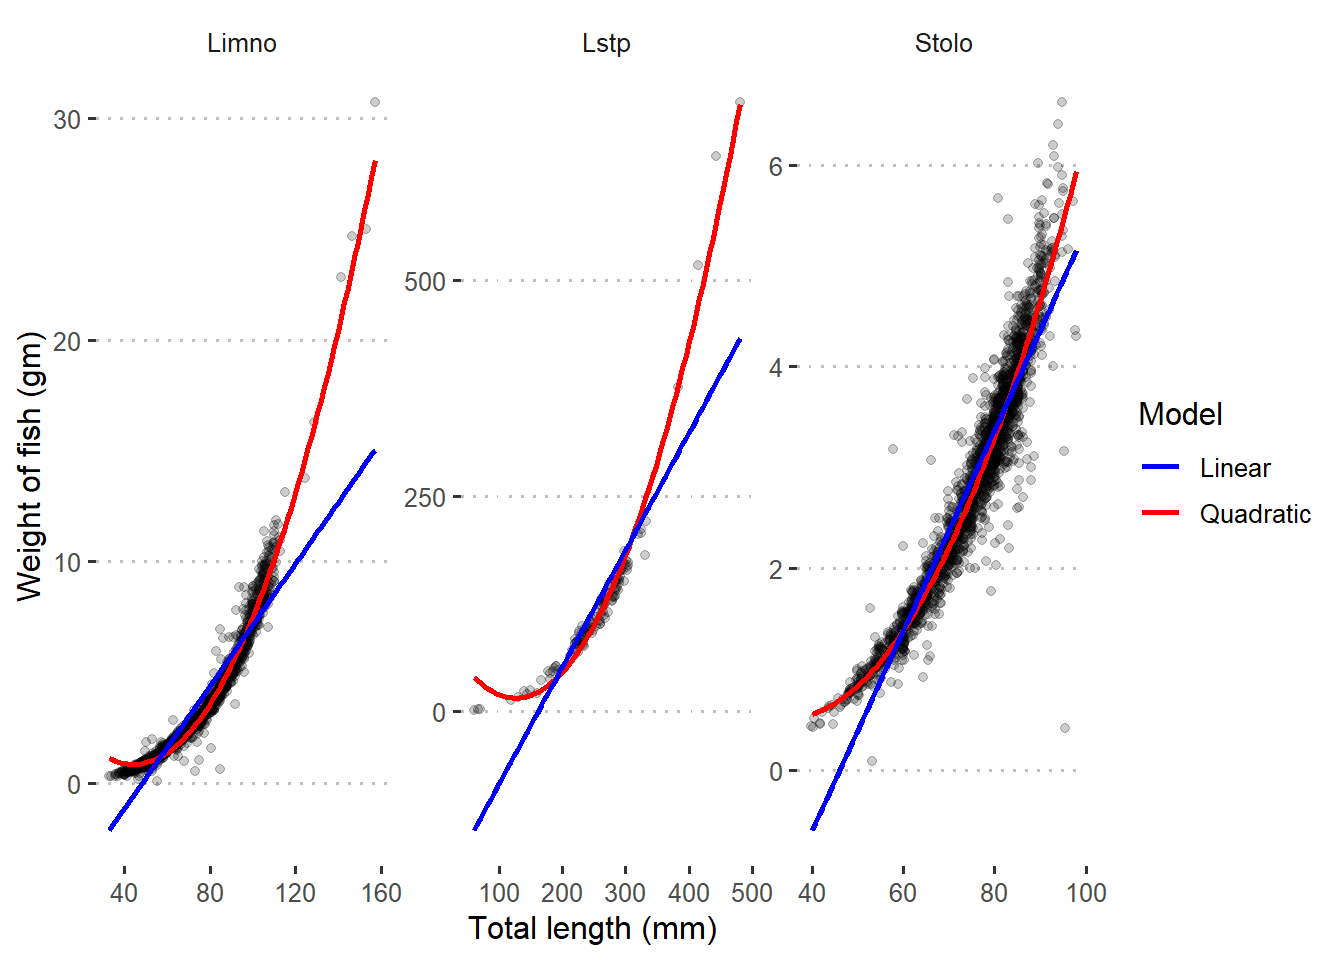 Quadratic and linear regression line superimposed in scatterplot with raw data